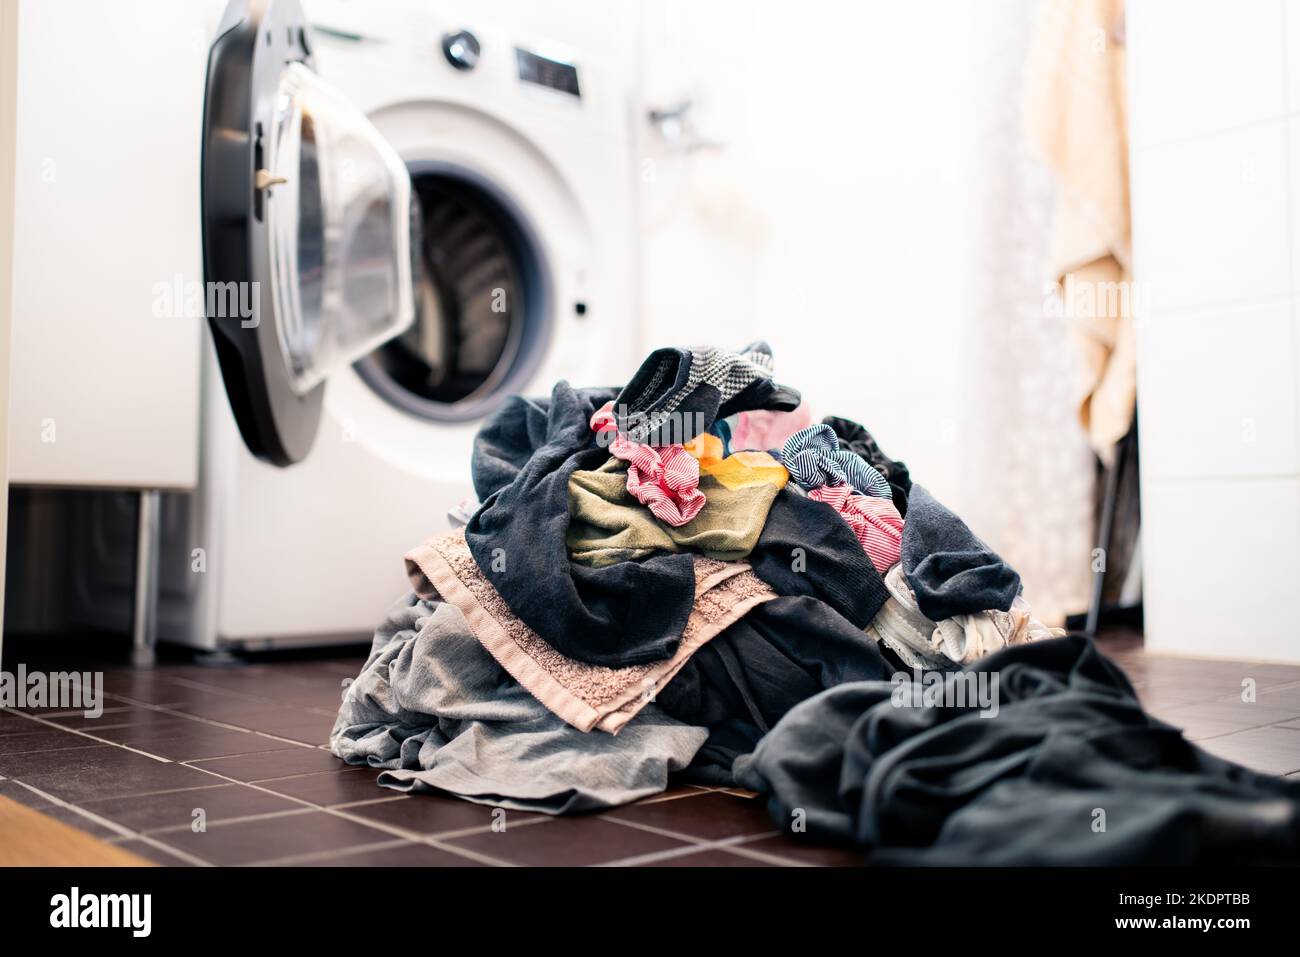 Laundry day. Washing machine in the background, pile of dirty clothes on the floor. Family house chores and domestic work concept. Heap of socks. Stock Photo